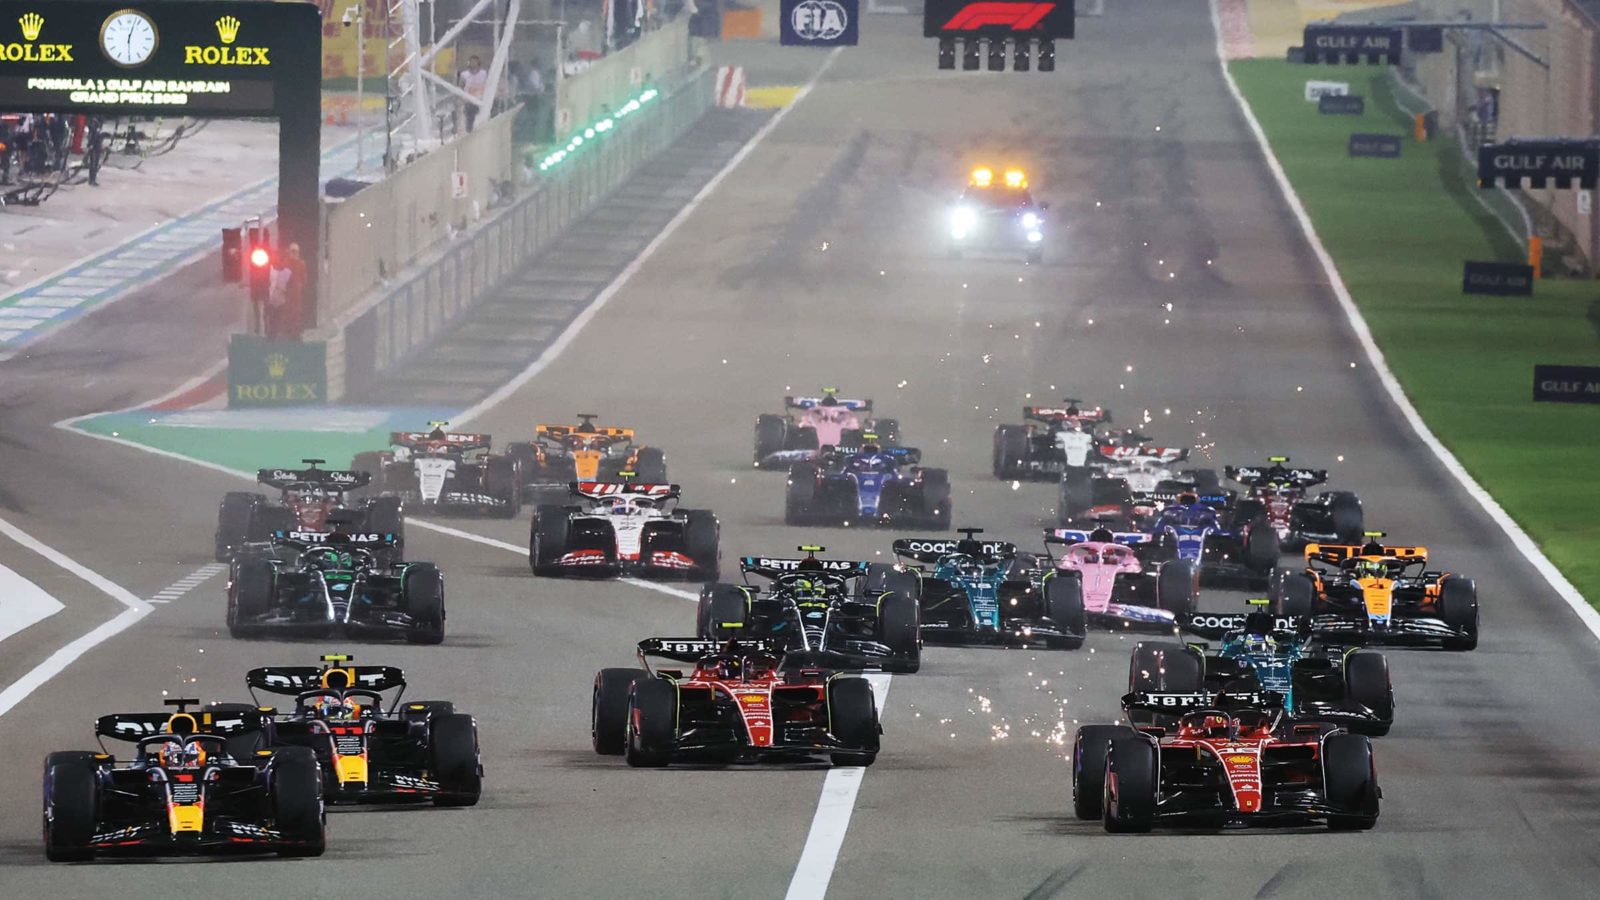 Max Verstappen, leads at the Bahrain Grand Prix